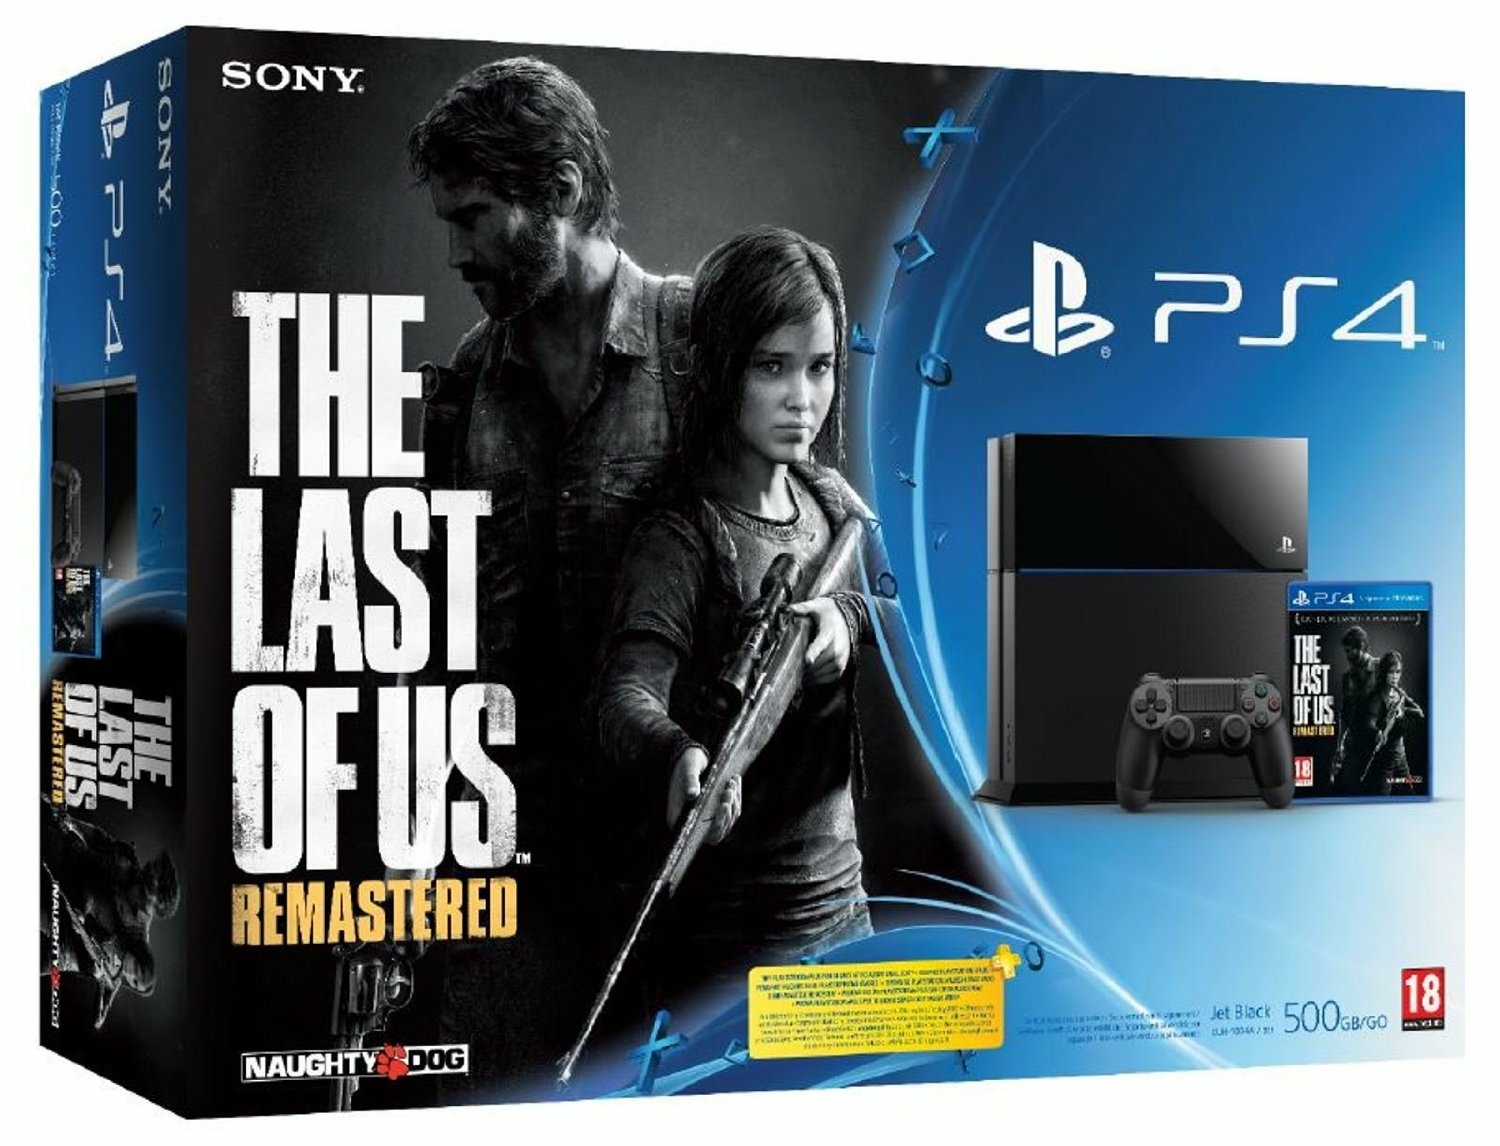 Ласт last. Пс4 the last of us Remastered. The last of us ps4. The last of us Remastered ps4 русская версия. The last of us ps4 диск.